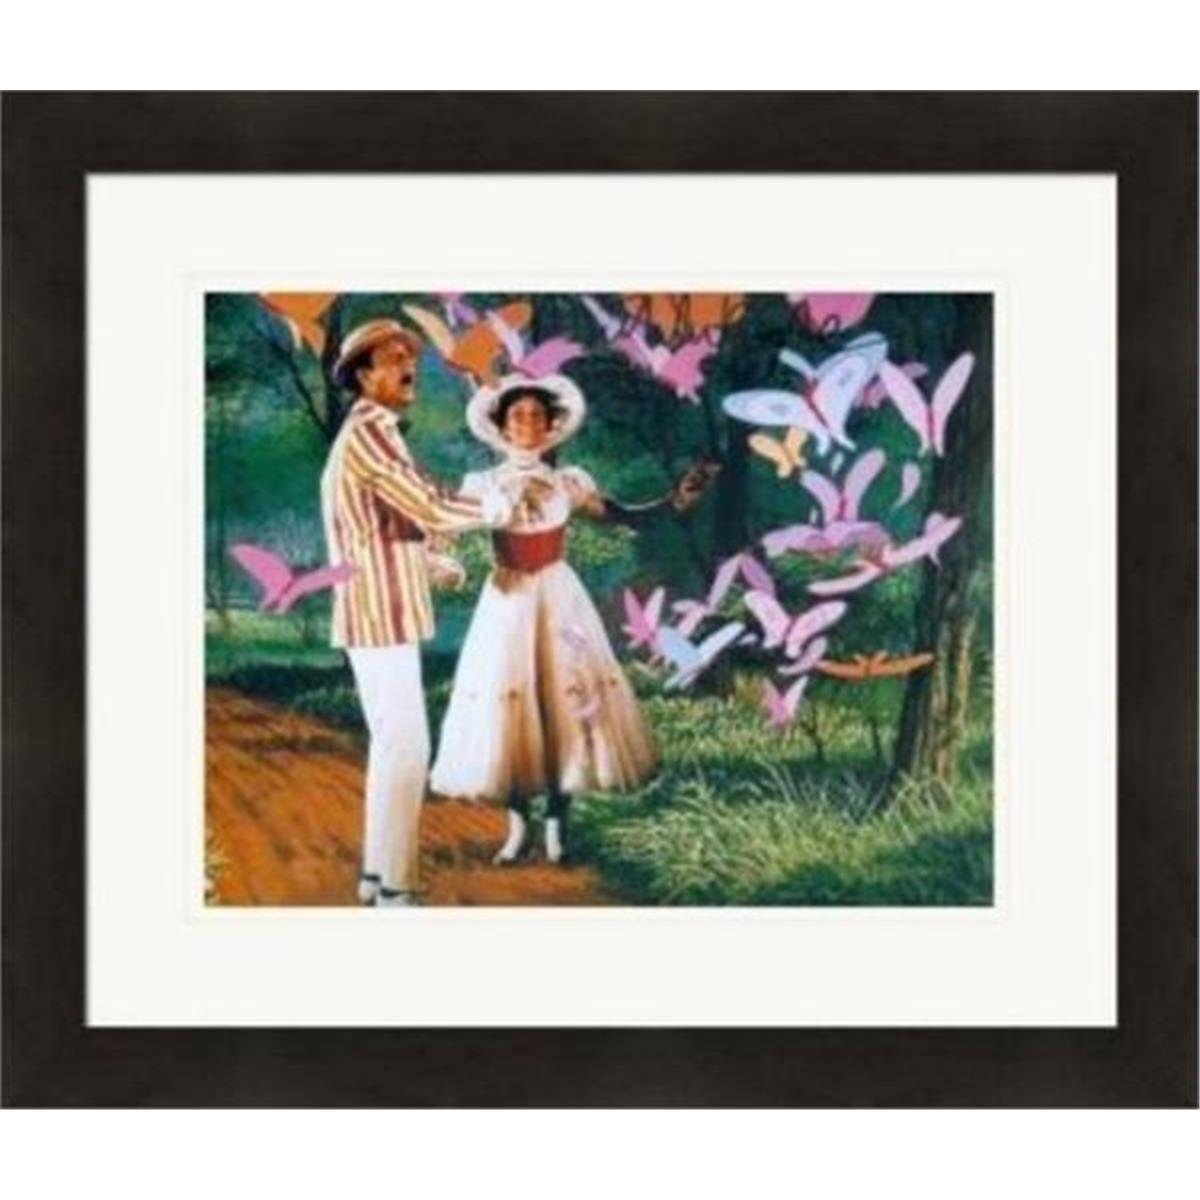 388060 8 x 10 in. Mary Poppins Matted & Framed Photo - Julie Andrews with Facsimile Signature of Dick Van Dyke No.SC1 -  Autograph Warehouse